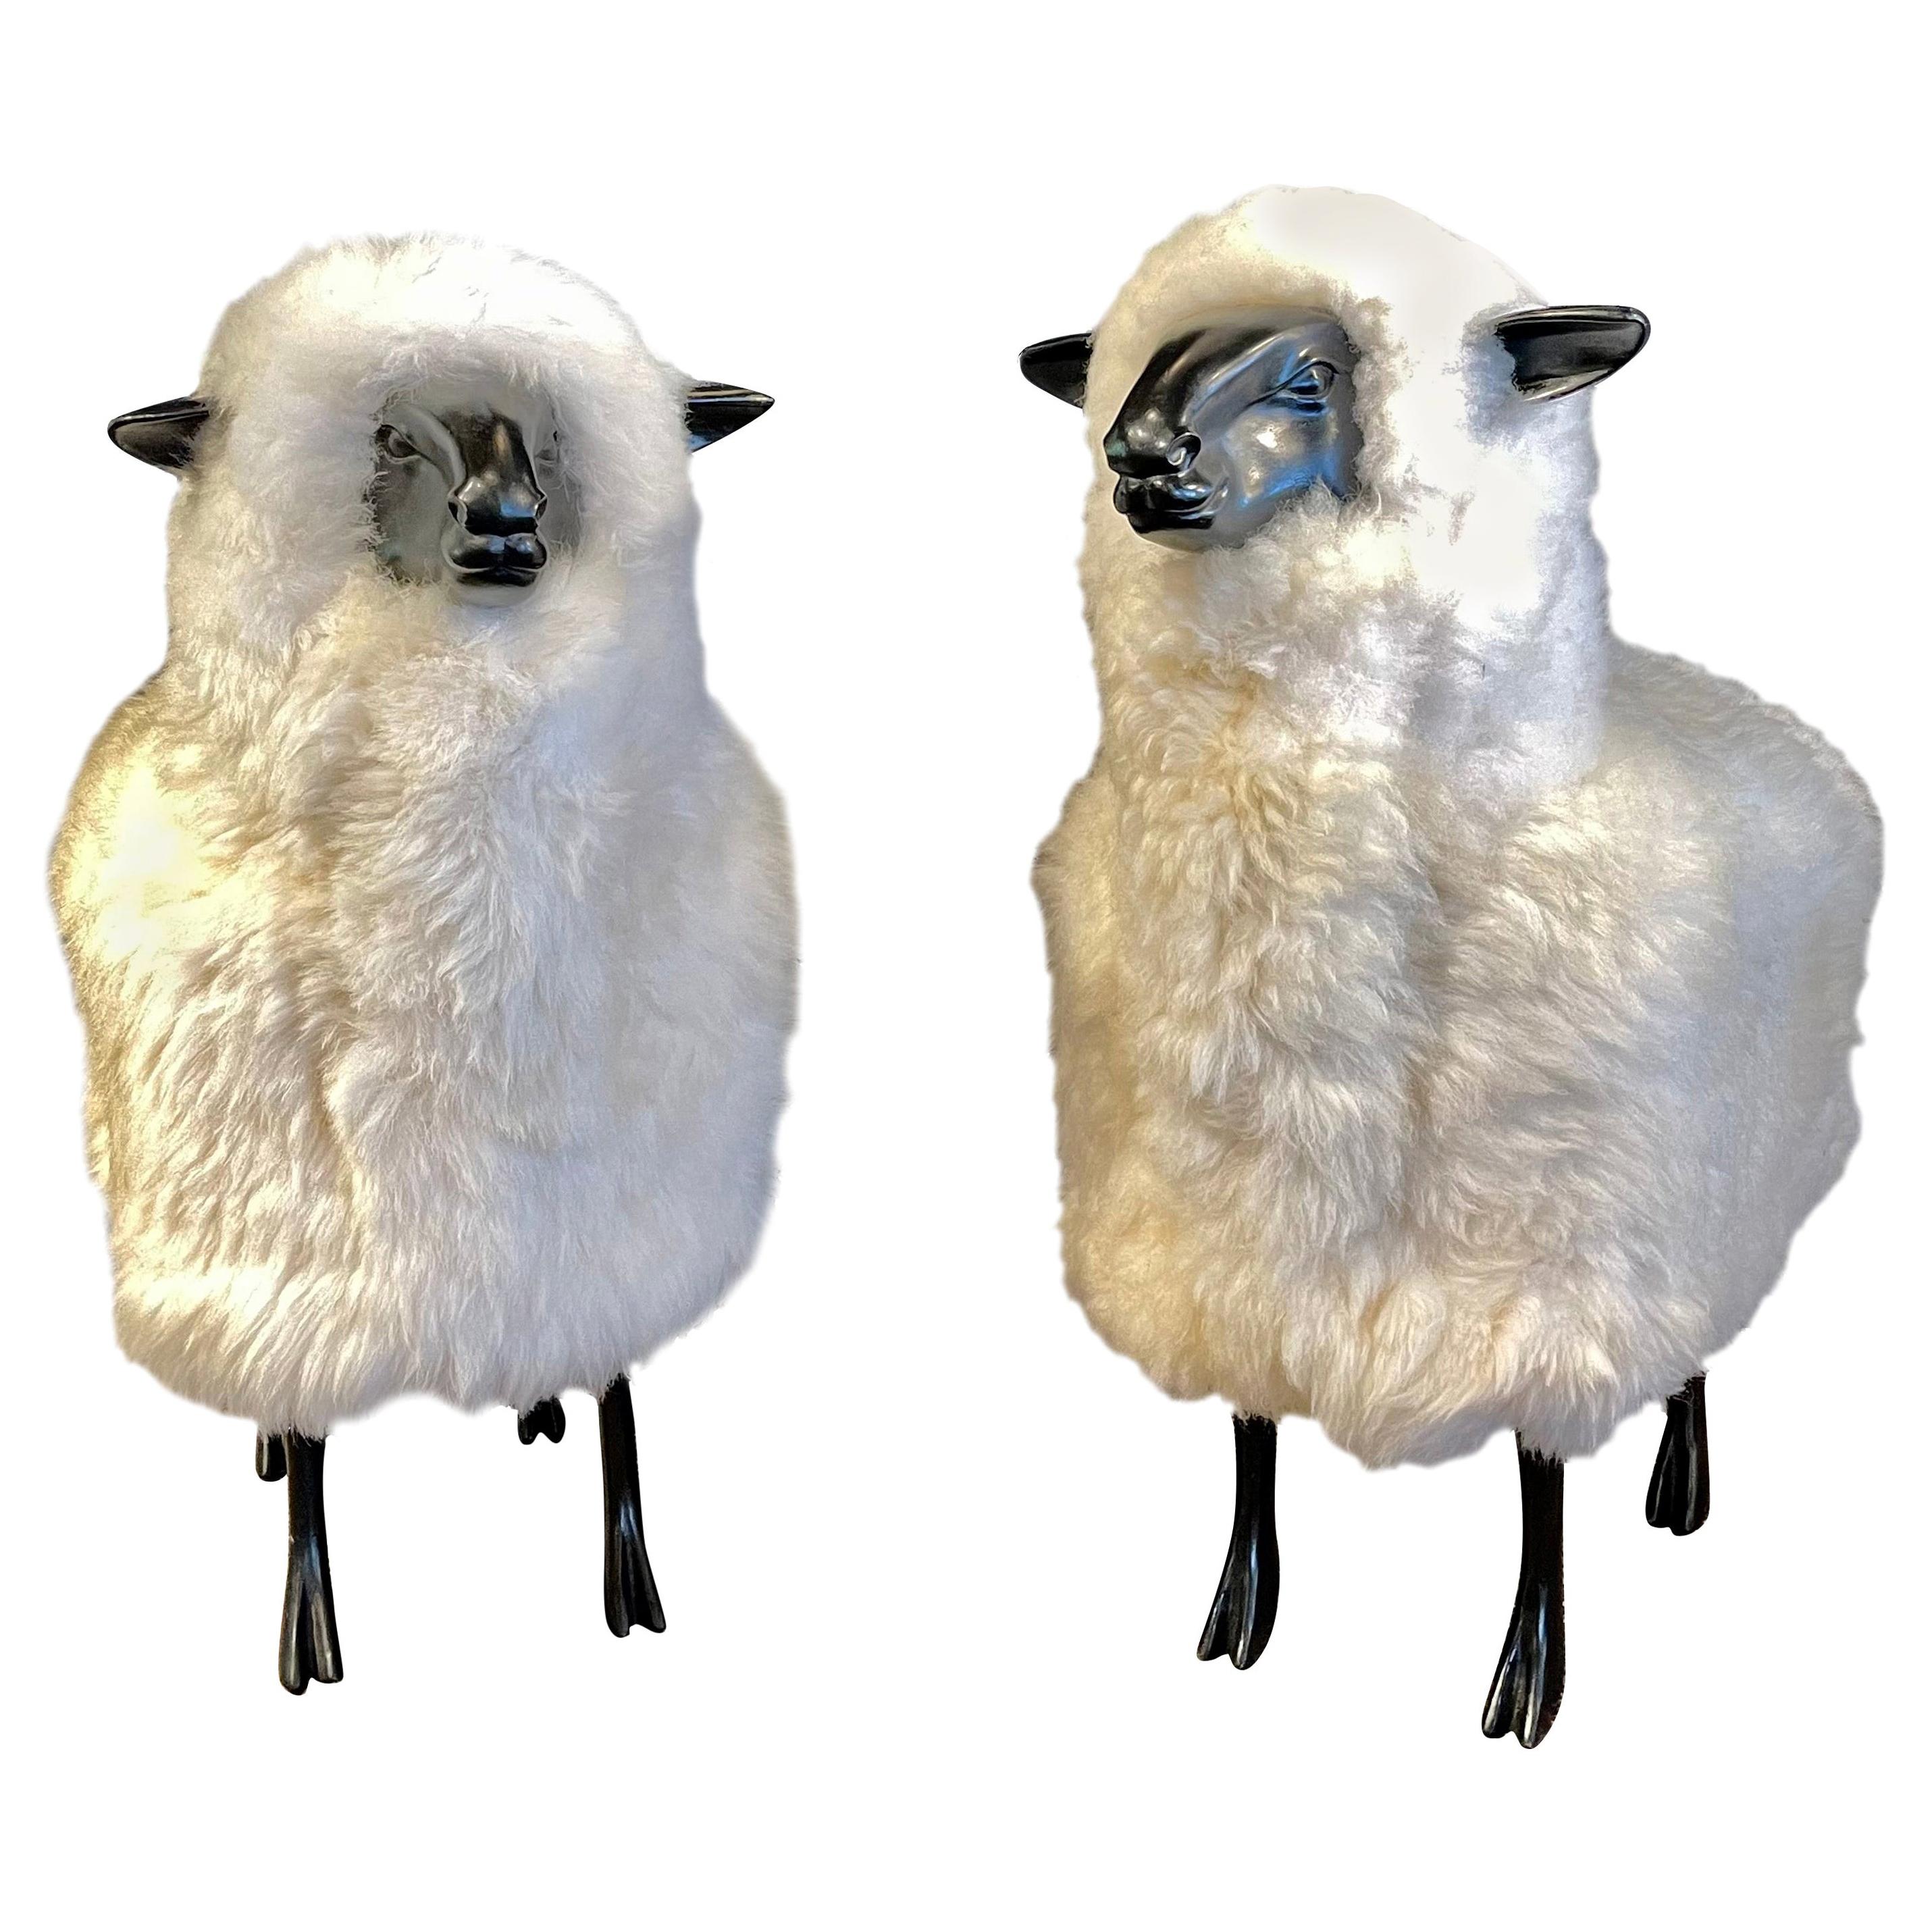 Pair of Mid-Century Modern Francois Lalanne Style Sheep Sculpture, Wool / Resin